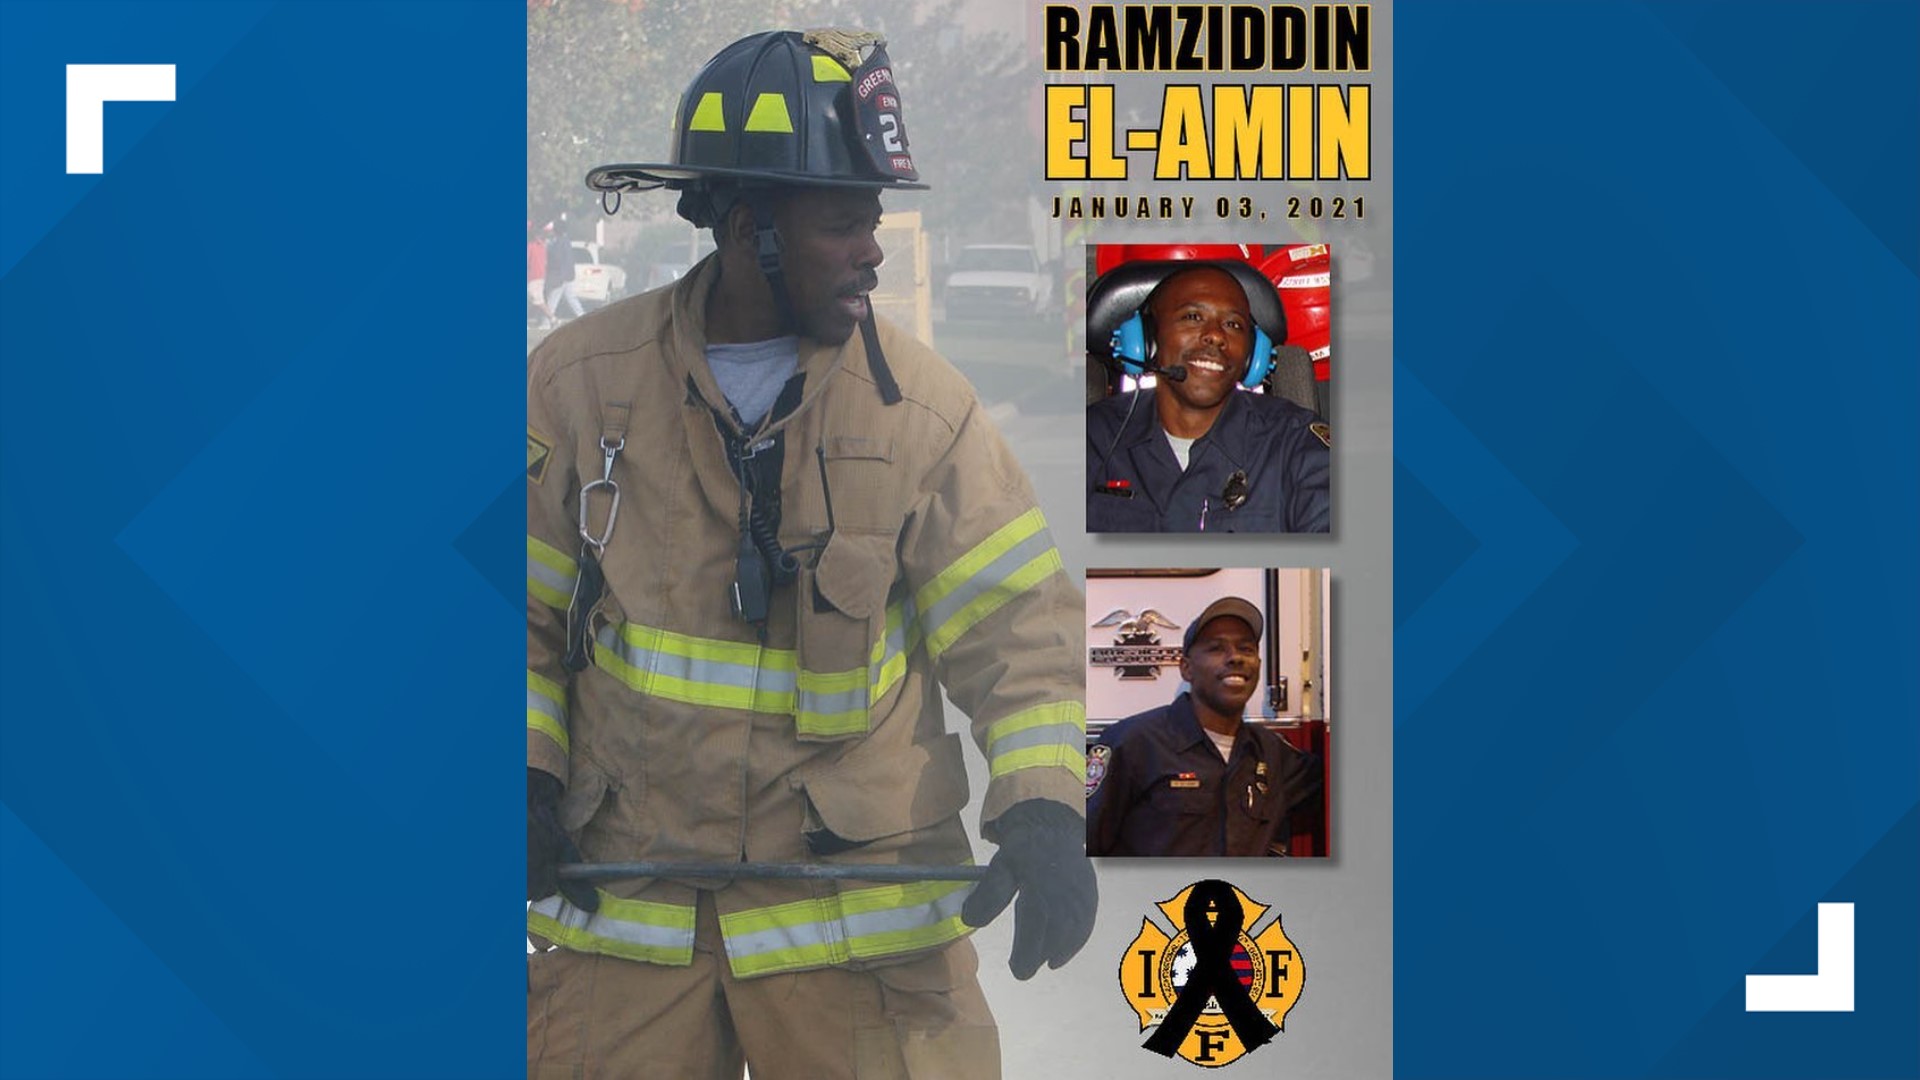 Ramziddin El-Amin served Greensboro for 21 years. His friends remembered him as a man who was always doing something and always had a smile on his face.